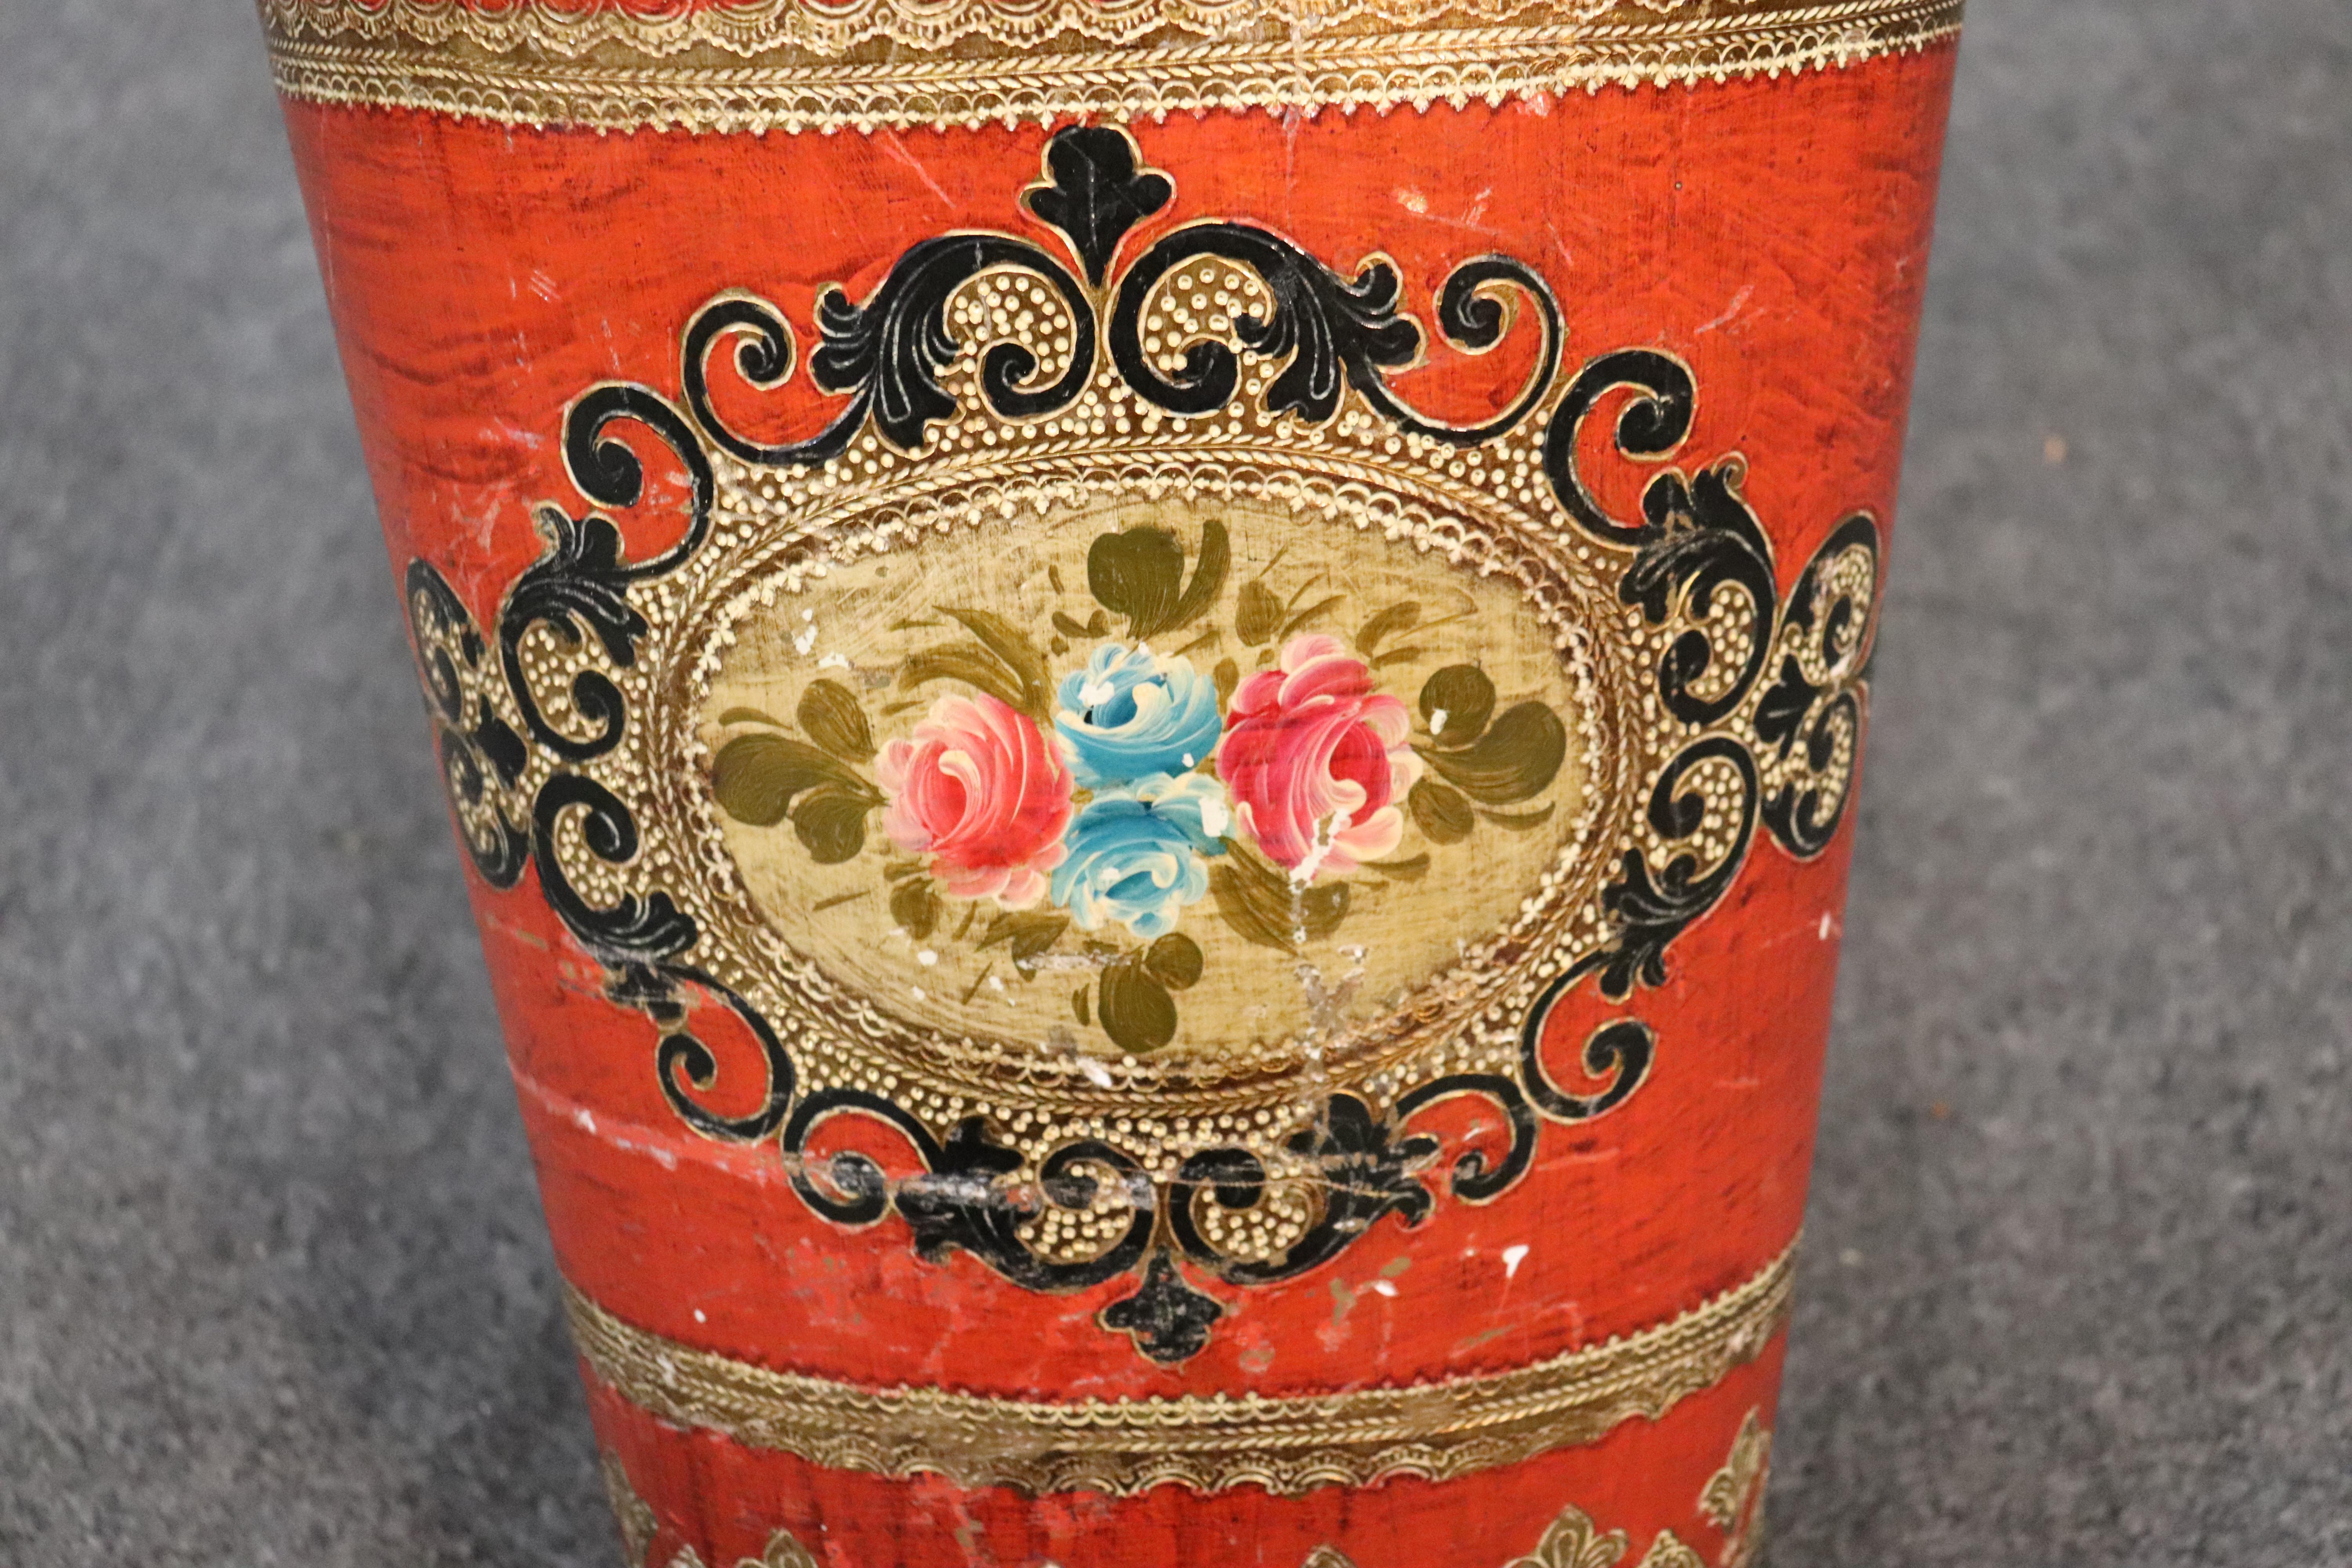 Beech Tall Florentine Paint Decorated Gilded Italian Waste Paper Basket Trash Can